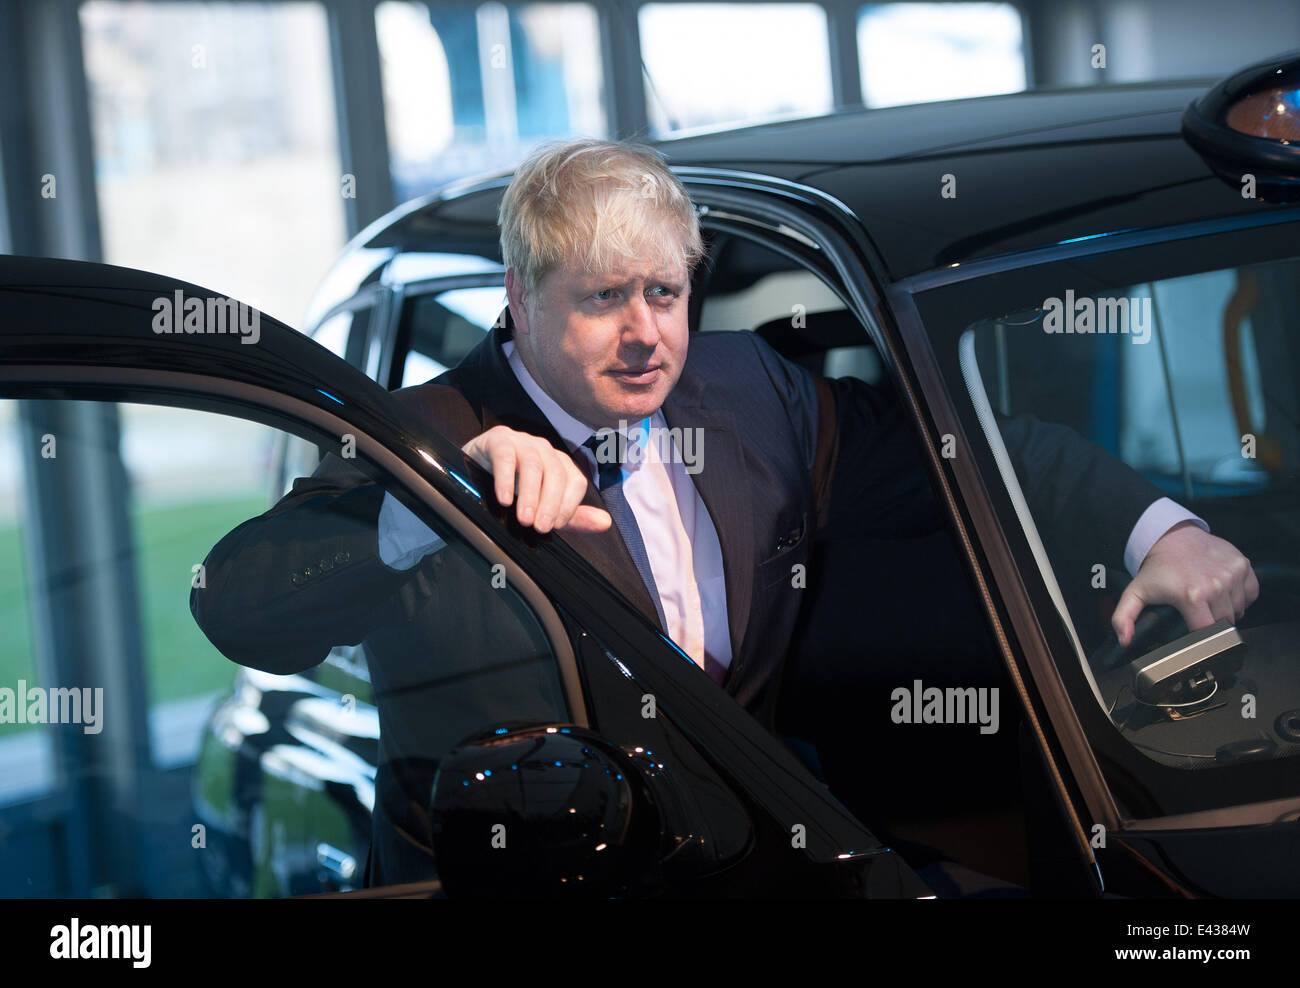 Mayor of London Boris Johnson attends an event showcasing low emission taxis to announce a 'challenging taxi emission target'. Manufacturers Fraser Nash, Karsan and The London Taxi Company display vehicles they currently have in development.  Featuring: B Stock Photo